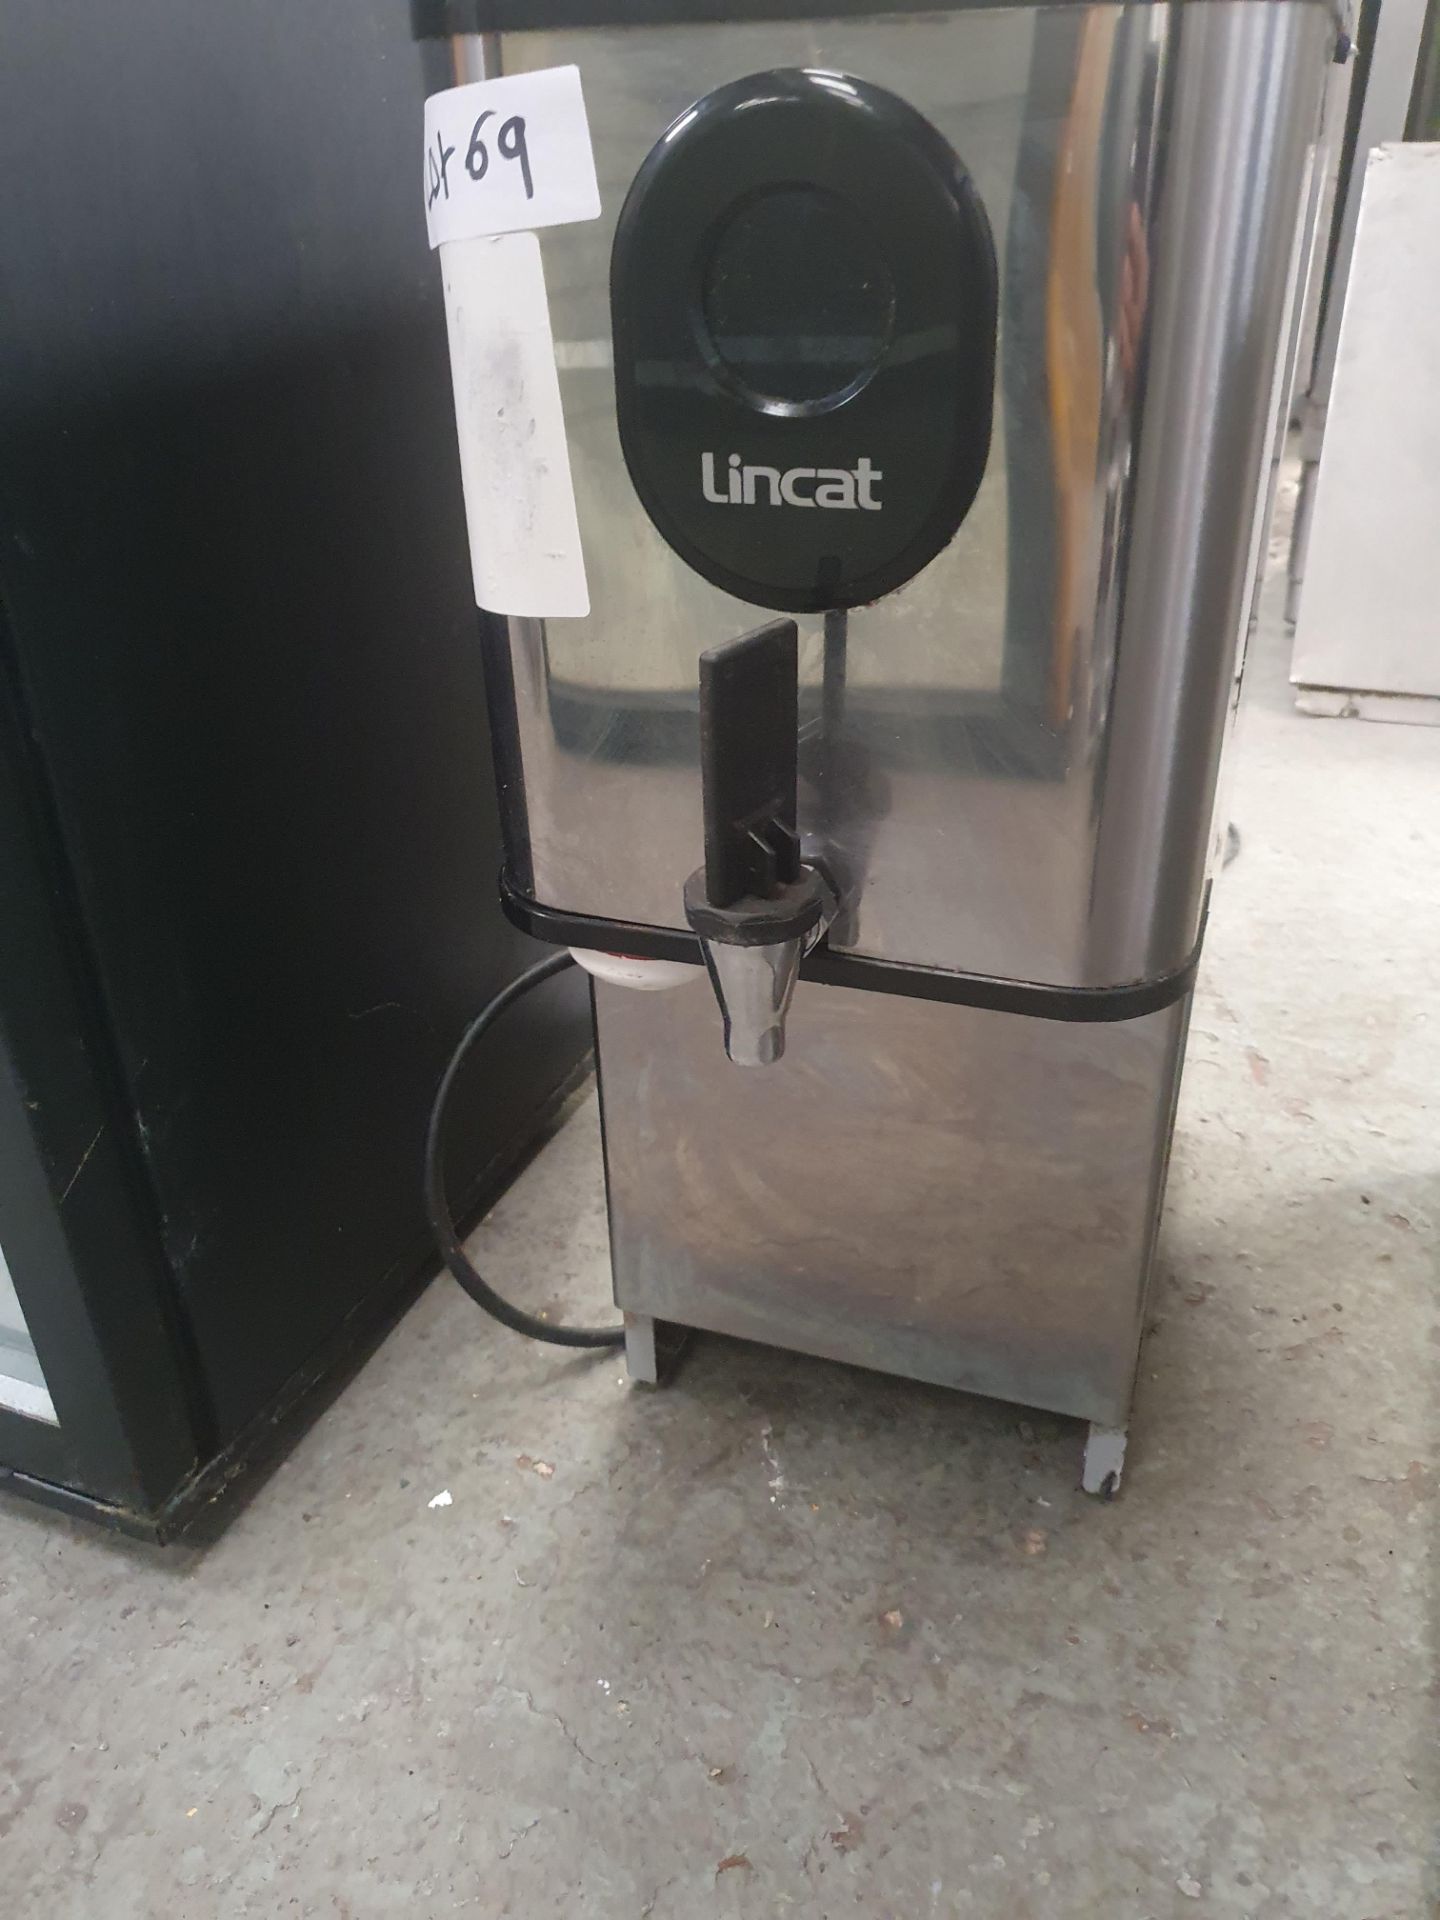 Lincat Water Boilers. Tested: Working - Image 2 of 2